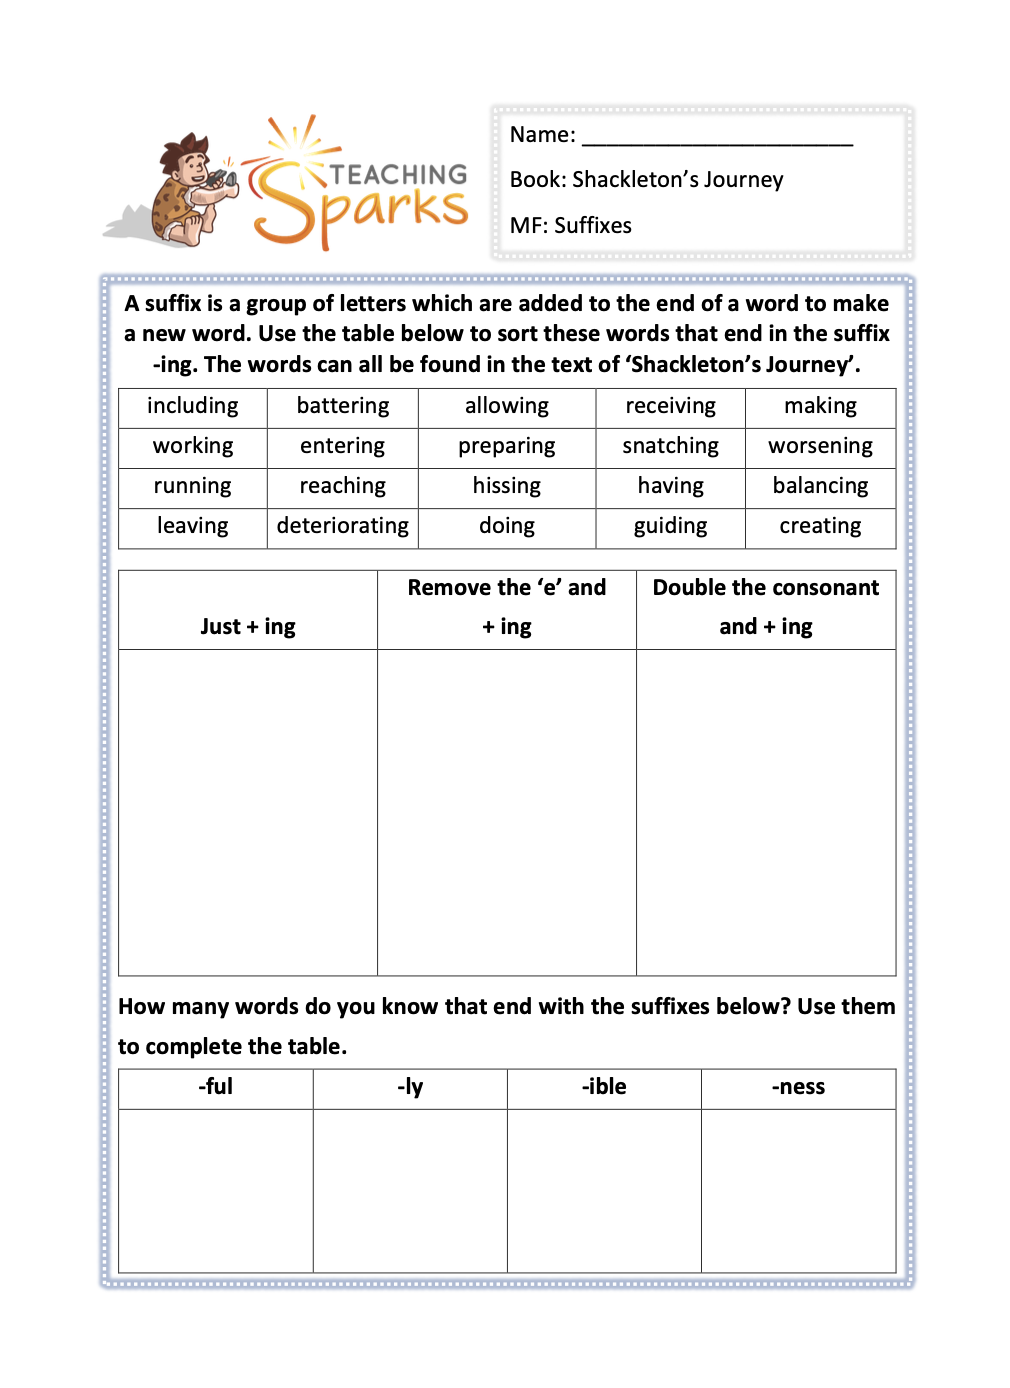 shackleton's journey guided reading planning